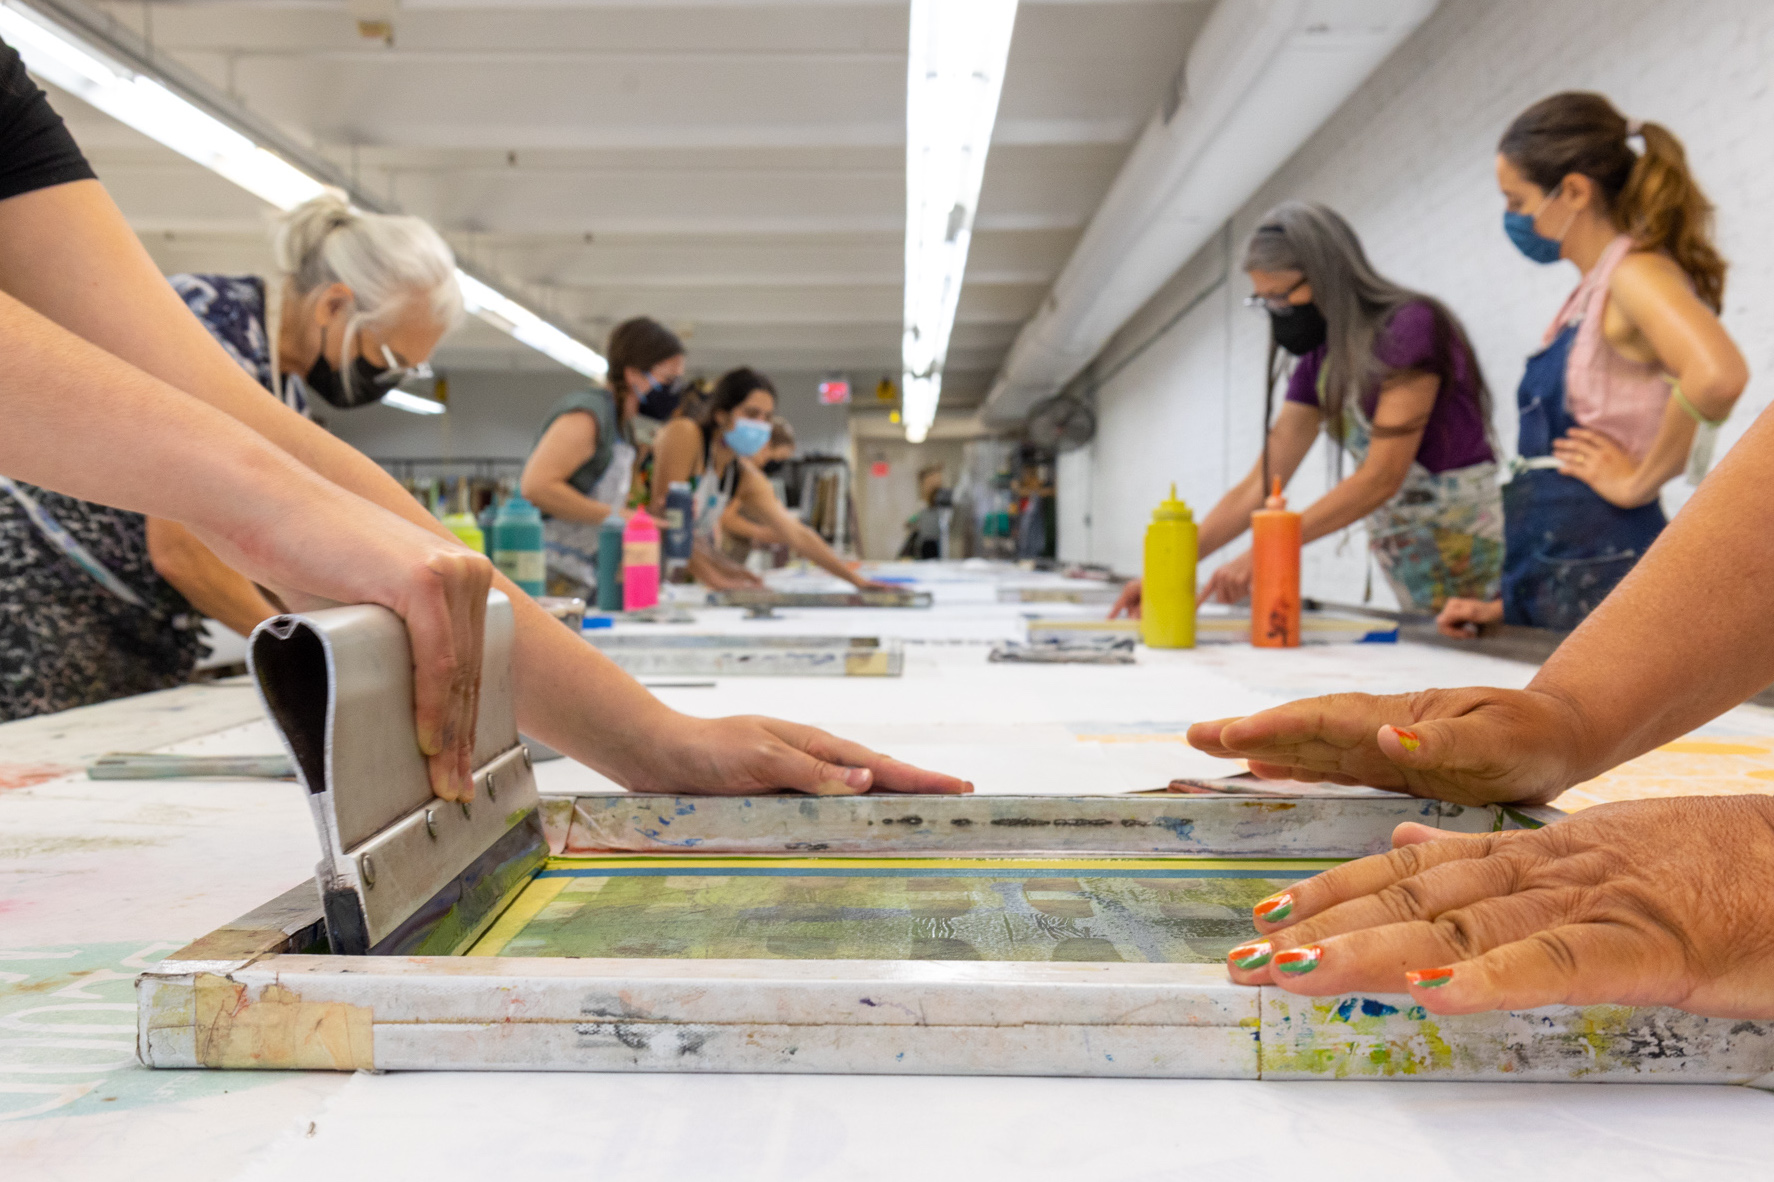 Participate in a hands-on screenprinting workshop